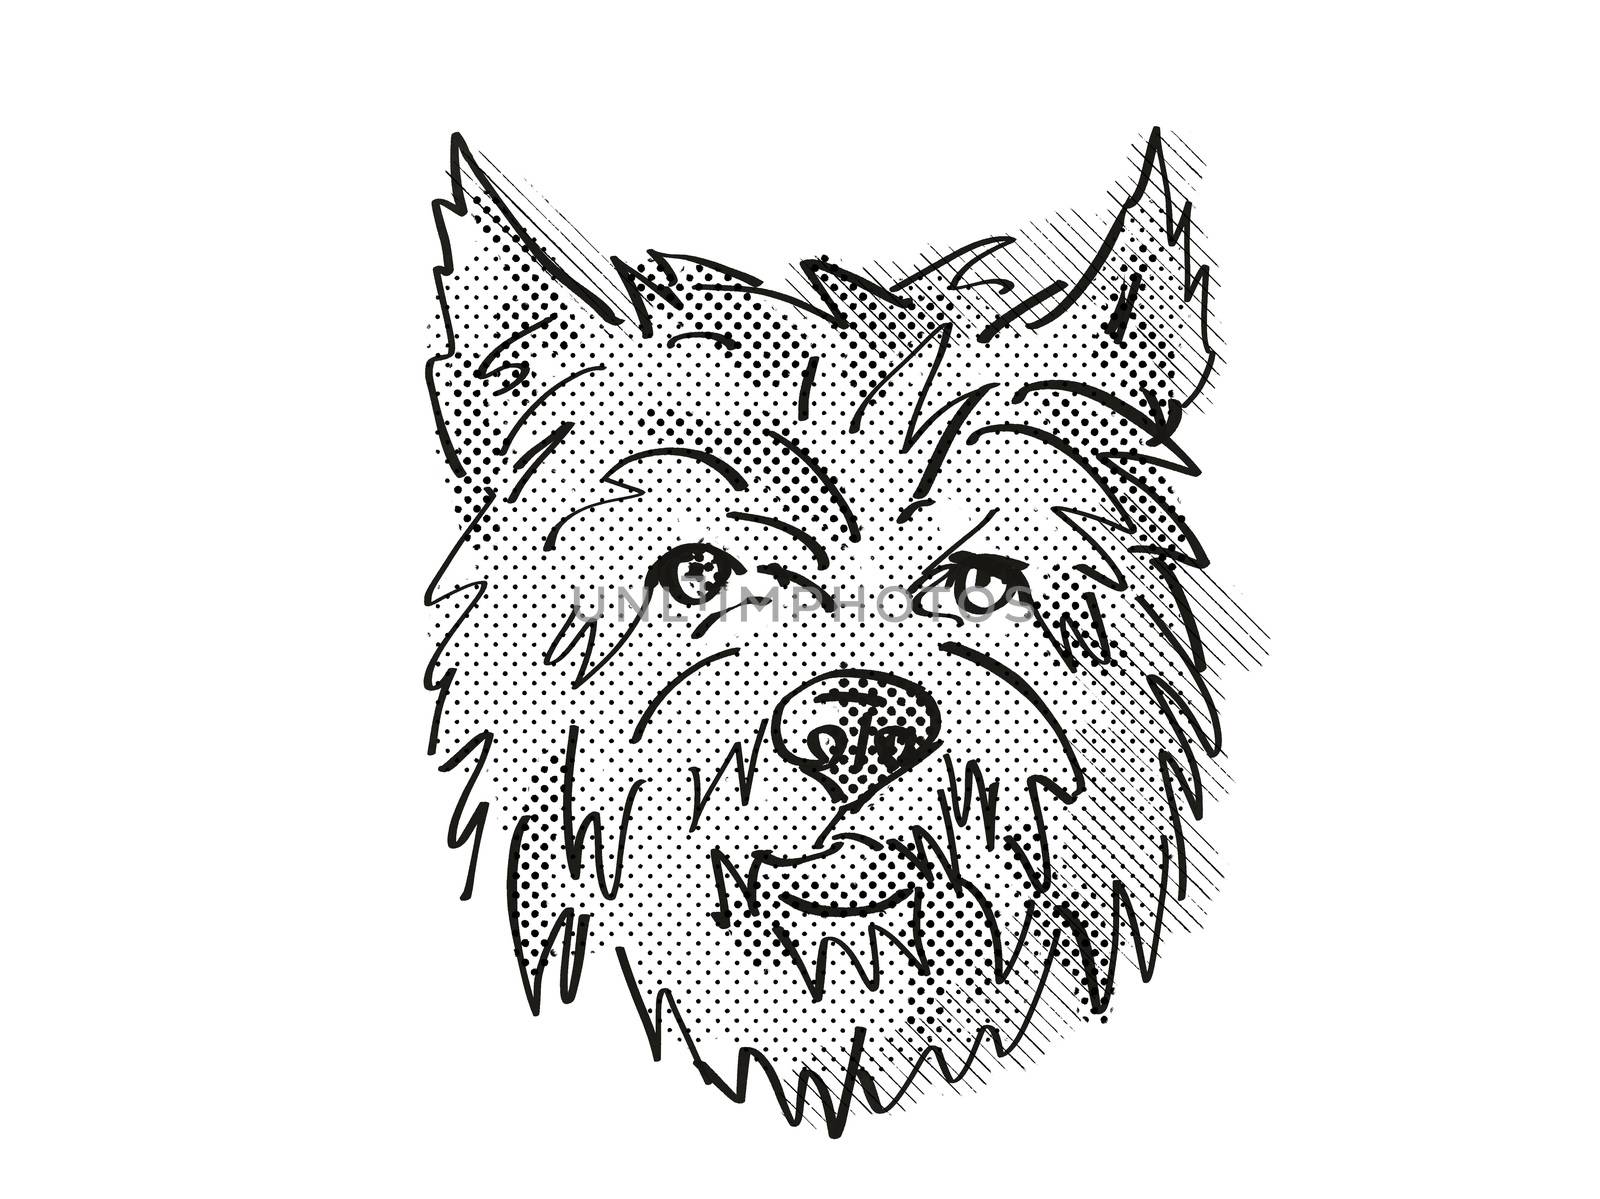 Retro cartoon style drawing of head of a Cairn Terrier, a domestic dog or canine breed on isolated white background done in black and white.